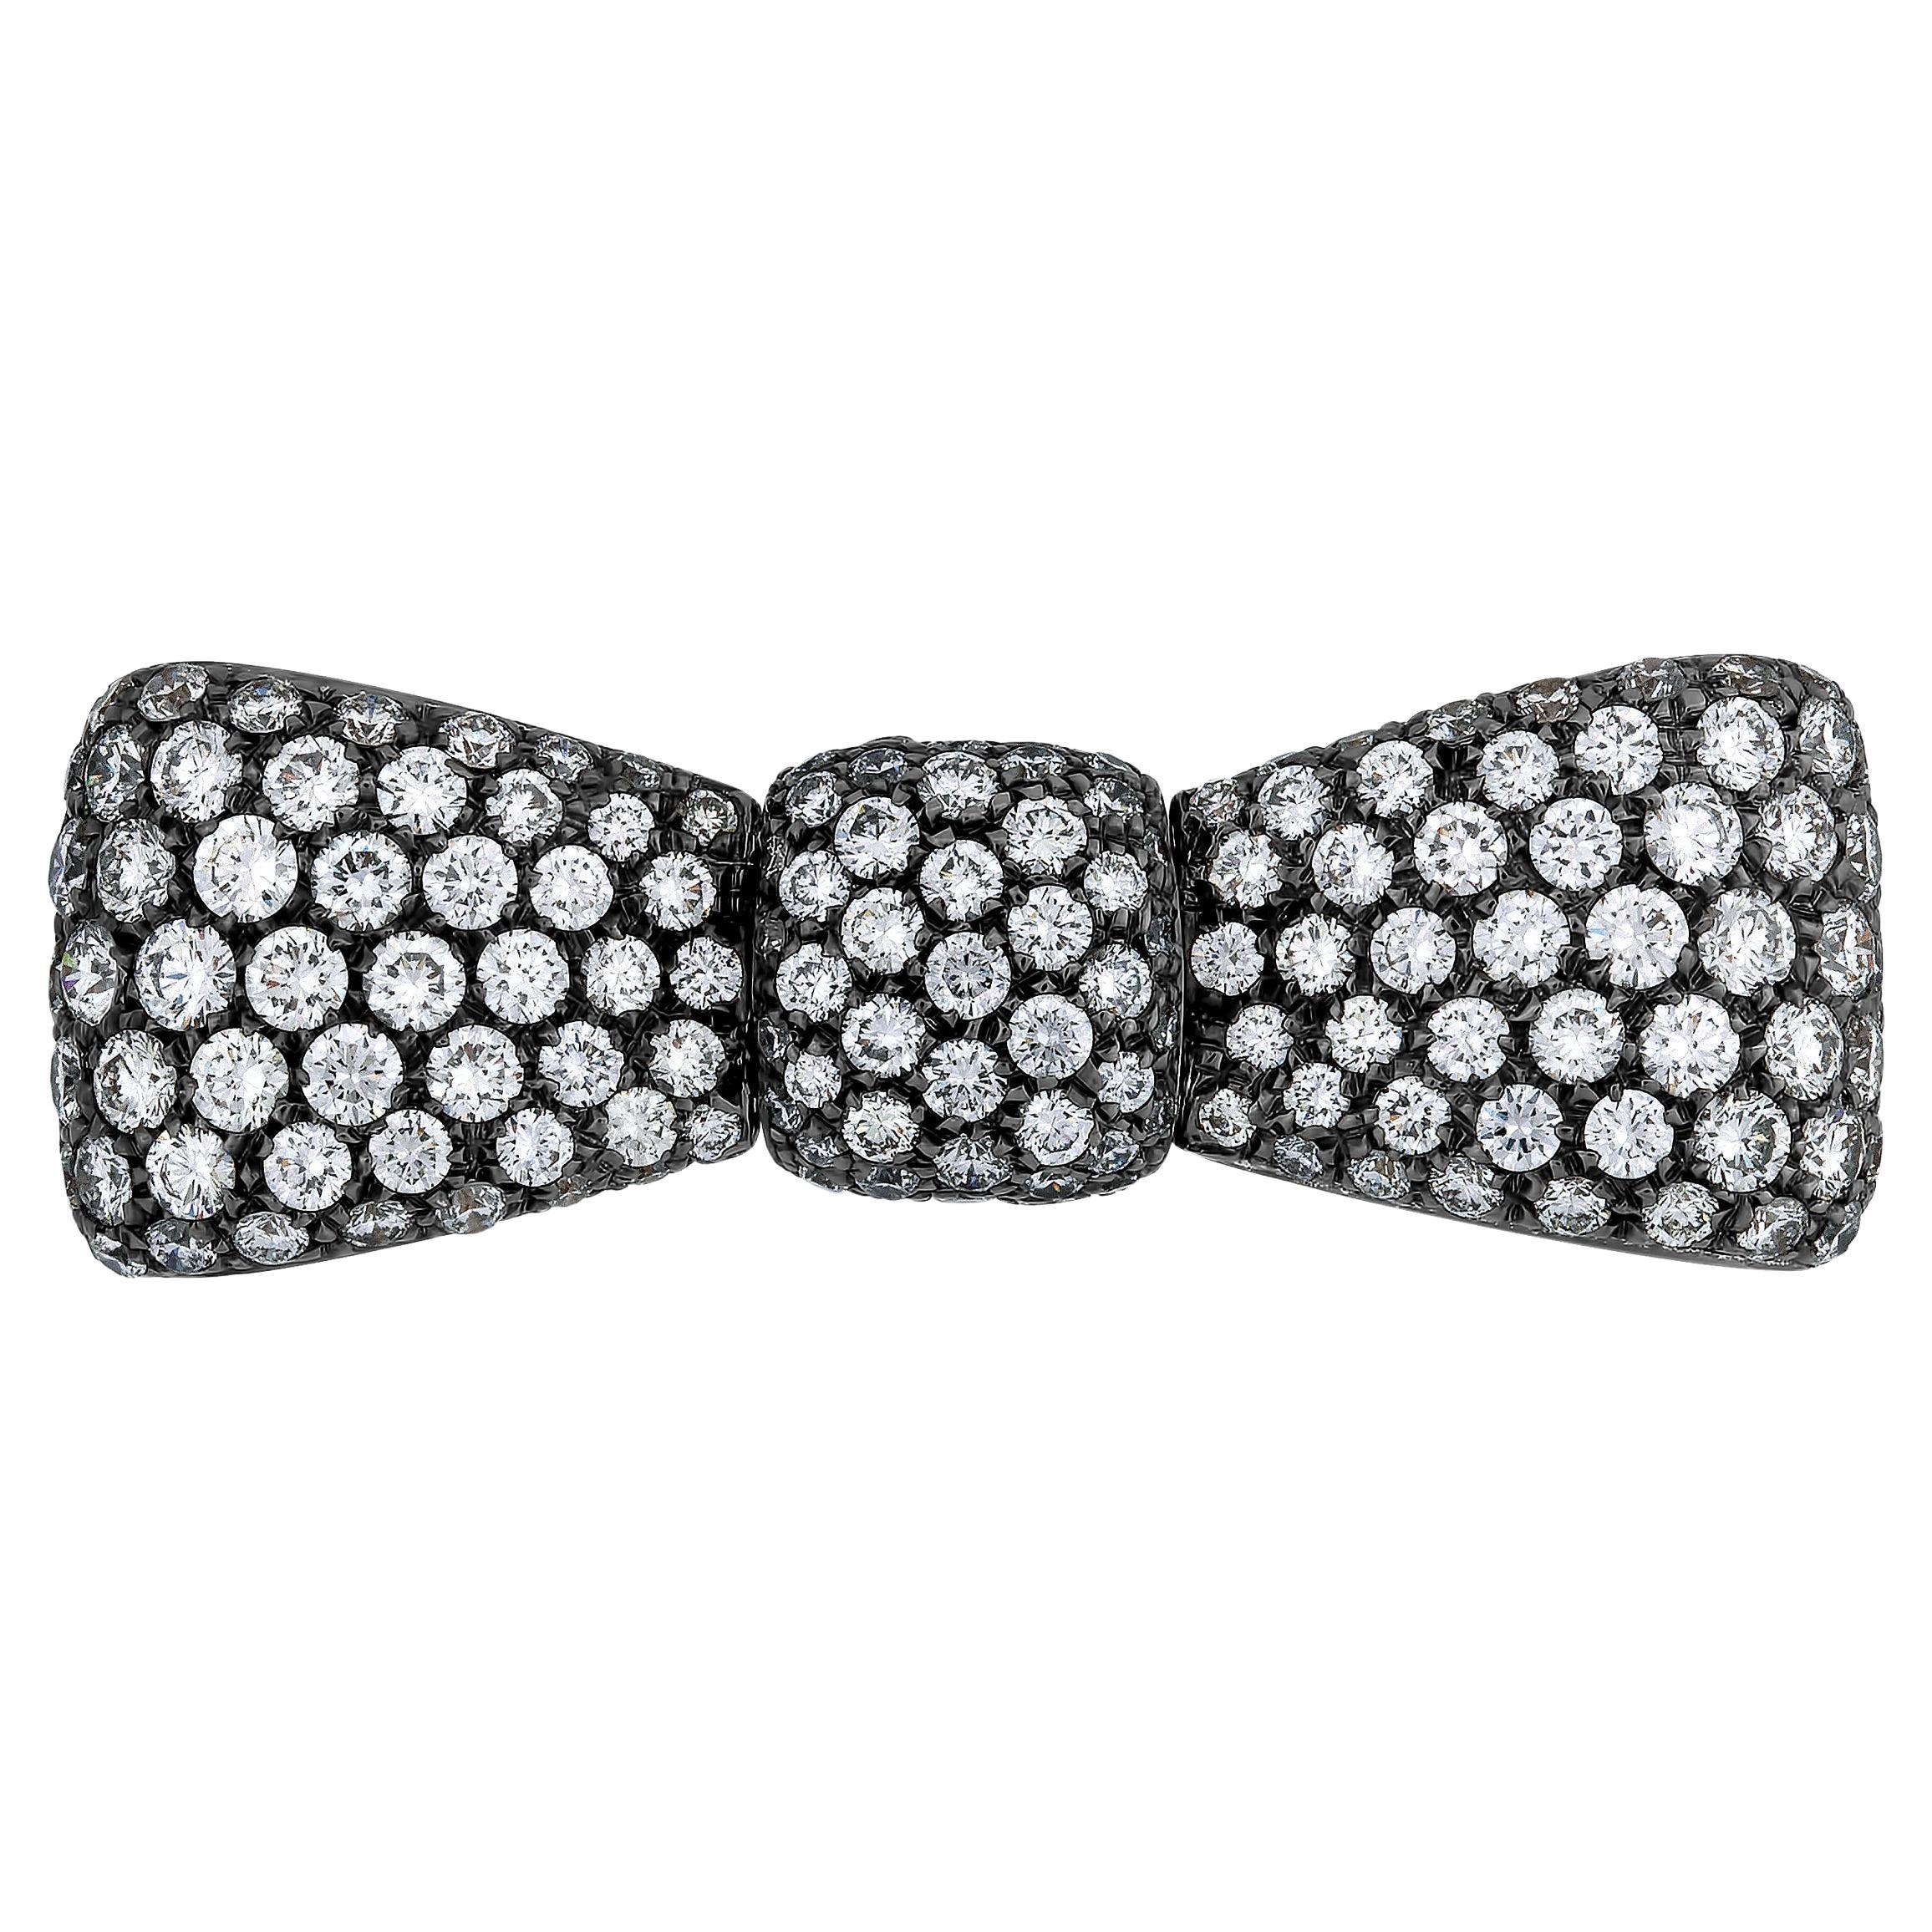 Luca Carati 18k White Gold and Diamond Bow Brooch